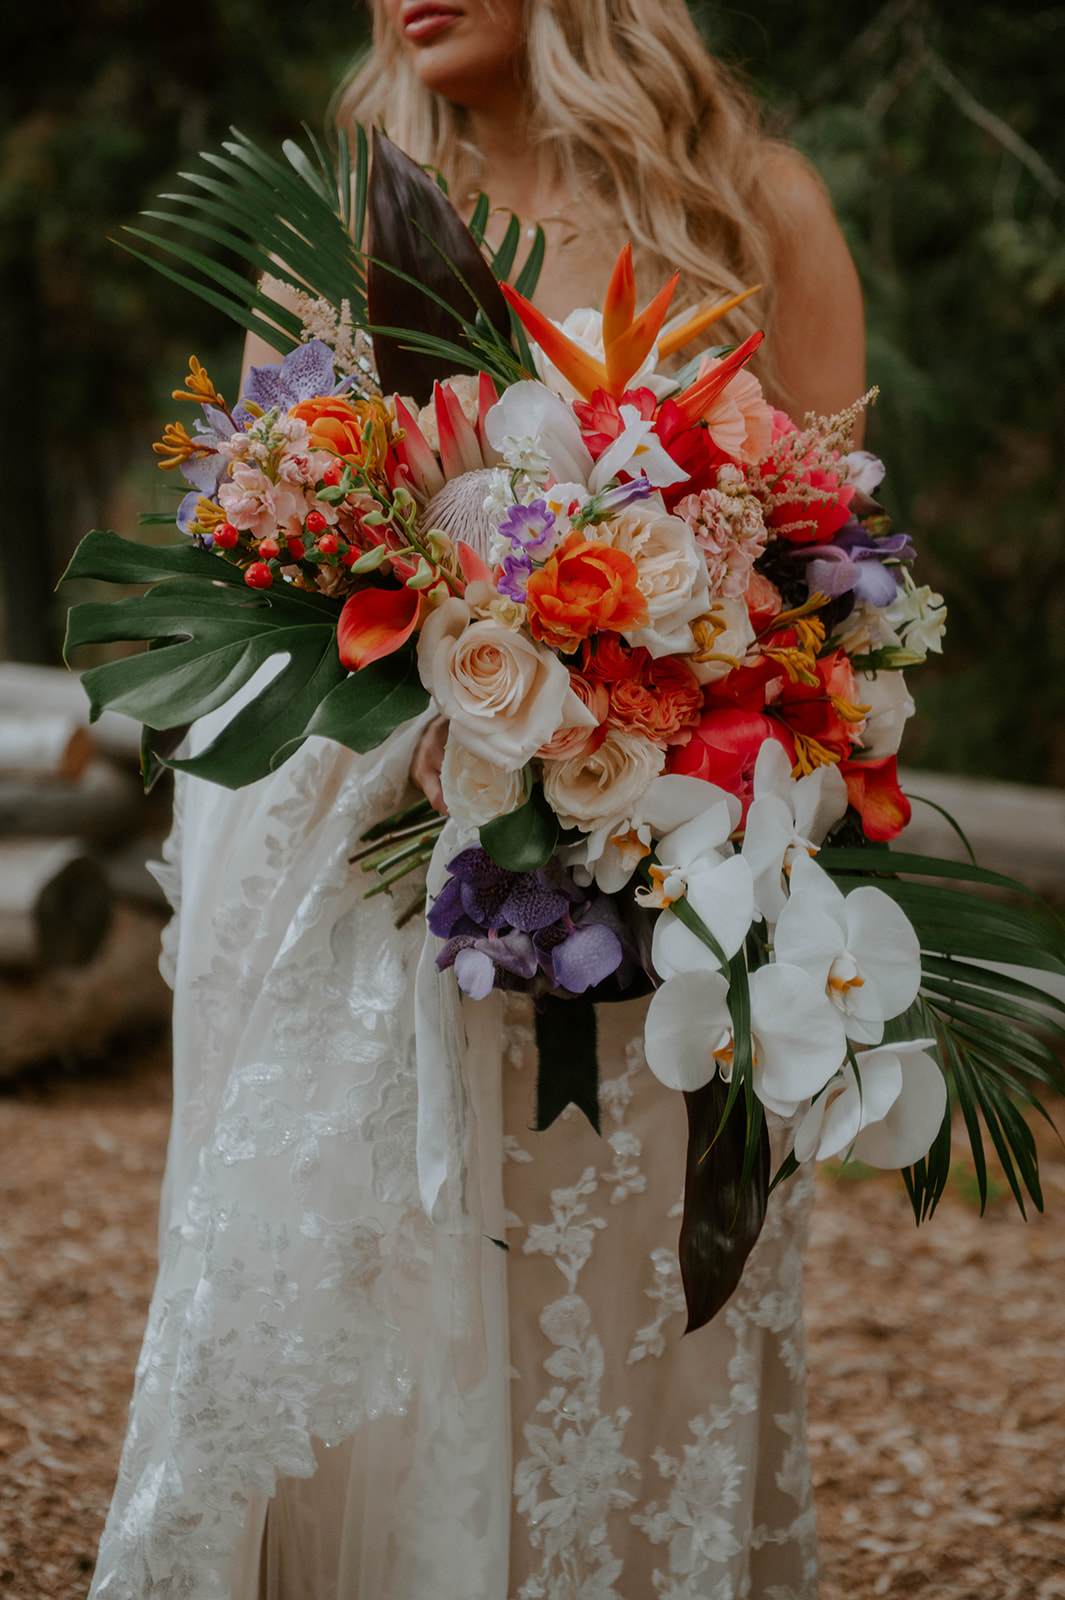 Tropical spring wedding bouquet with a protea, palm, and orchids.